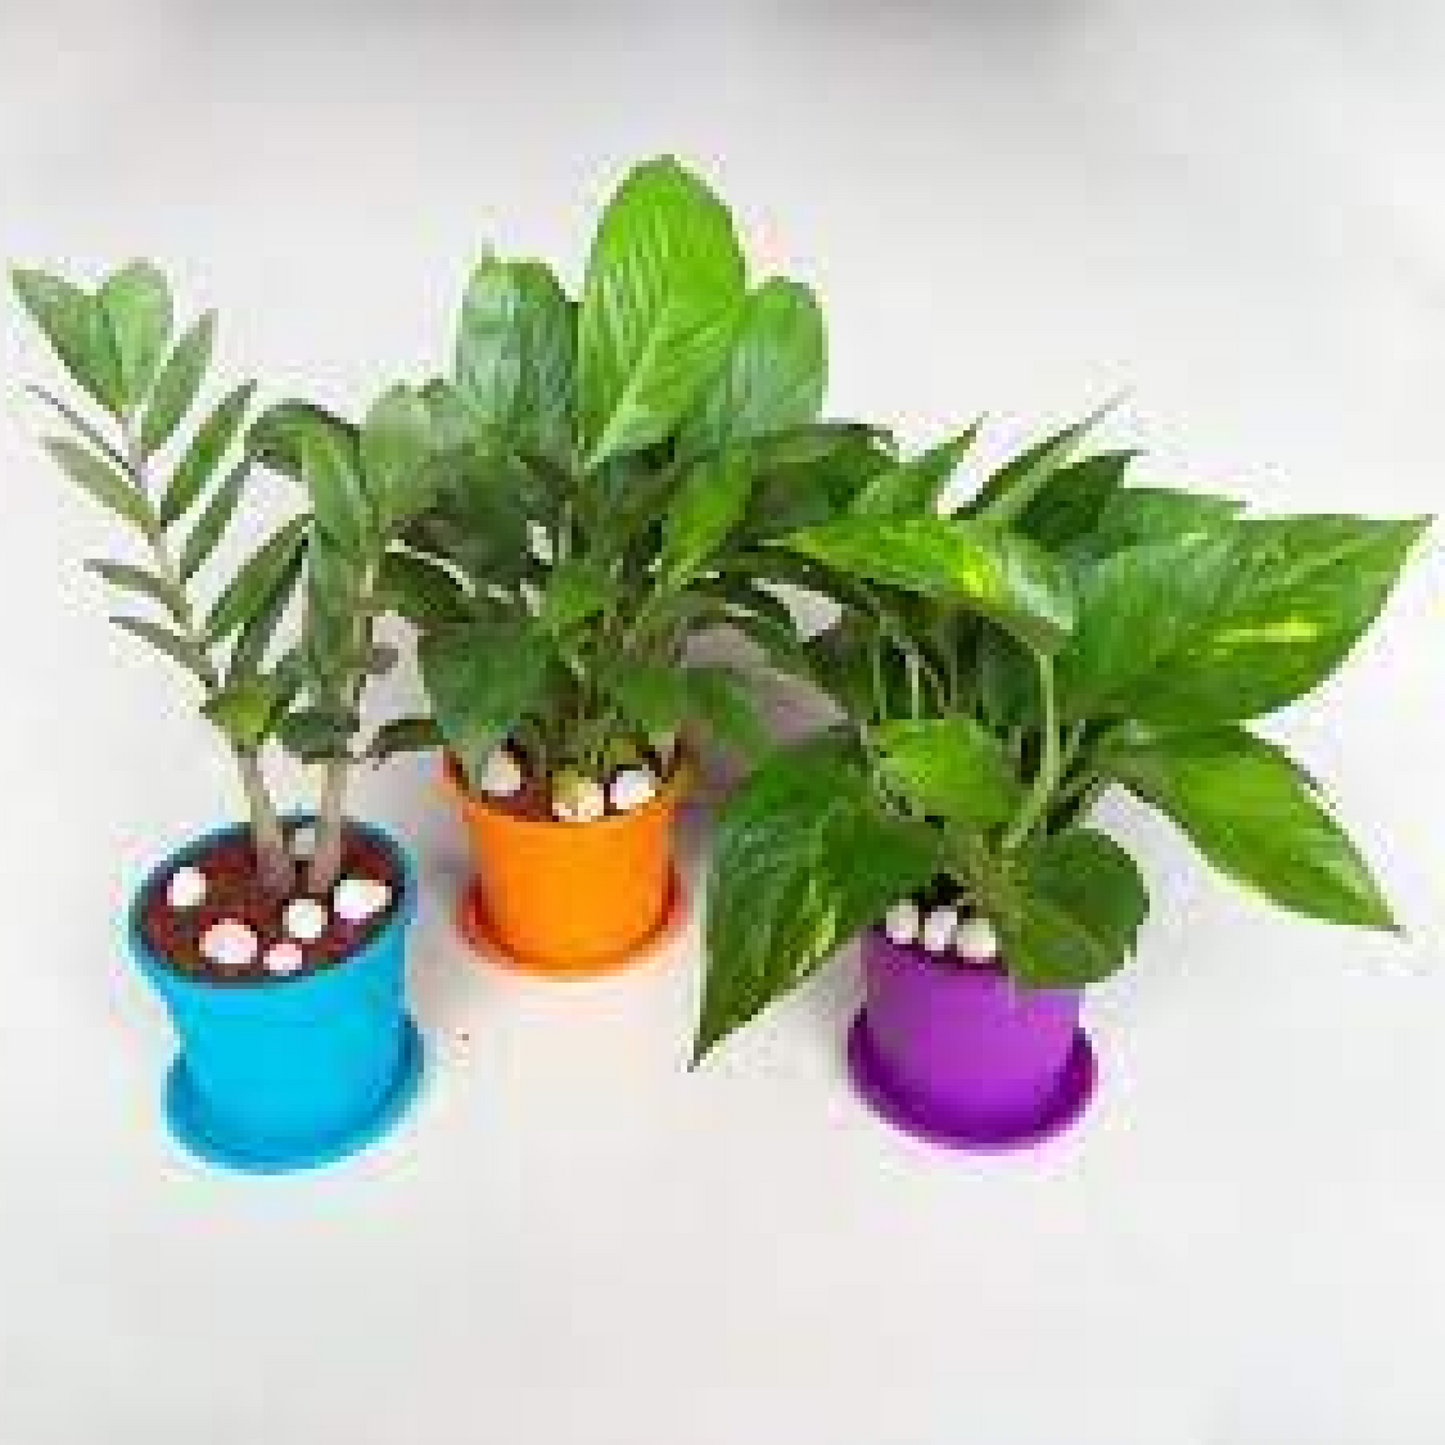 NASA Recommended Table Top / Office Desk Plants